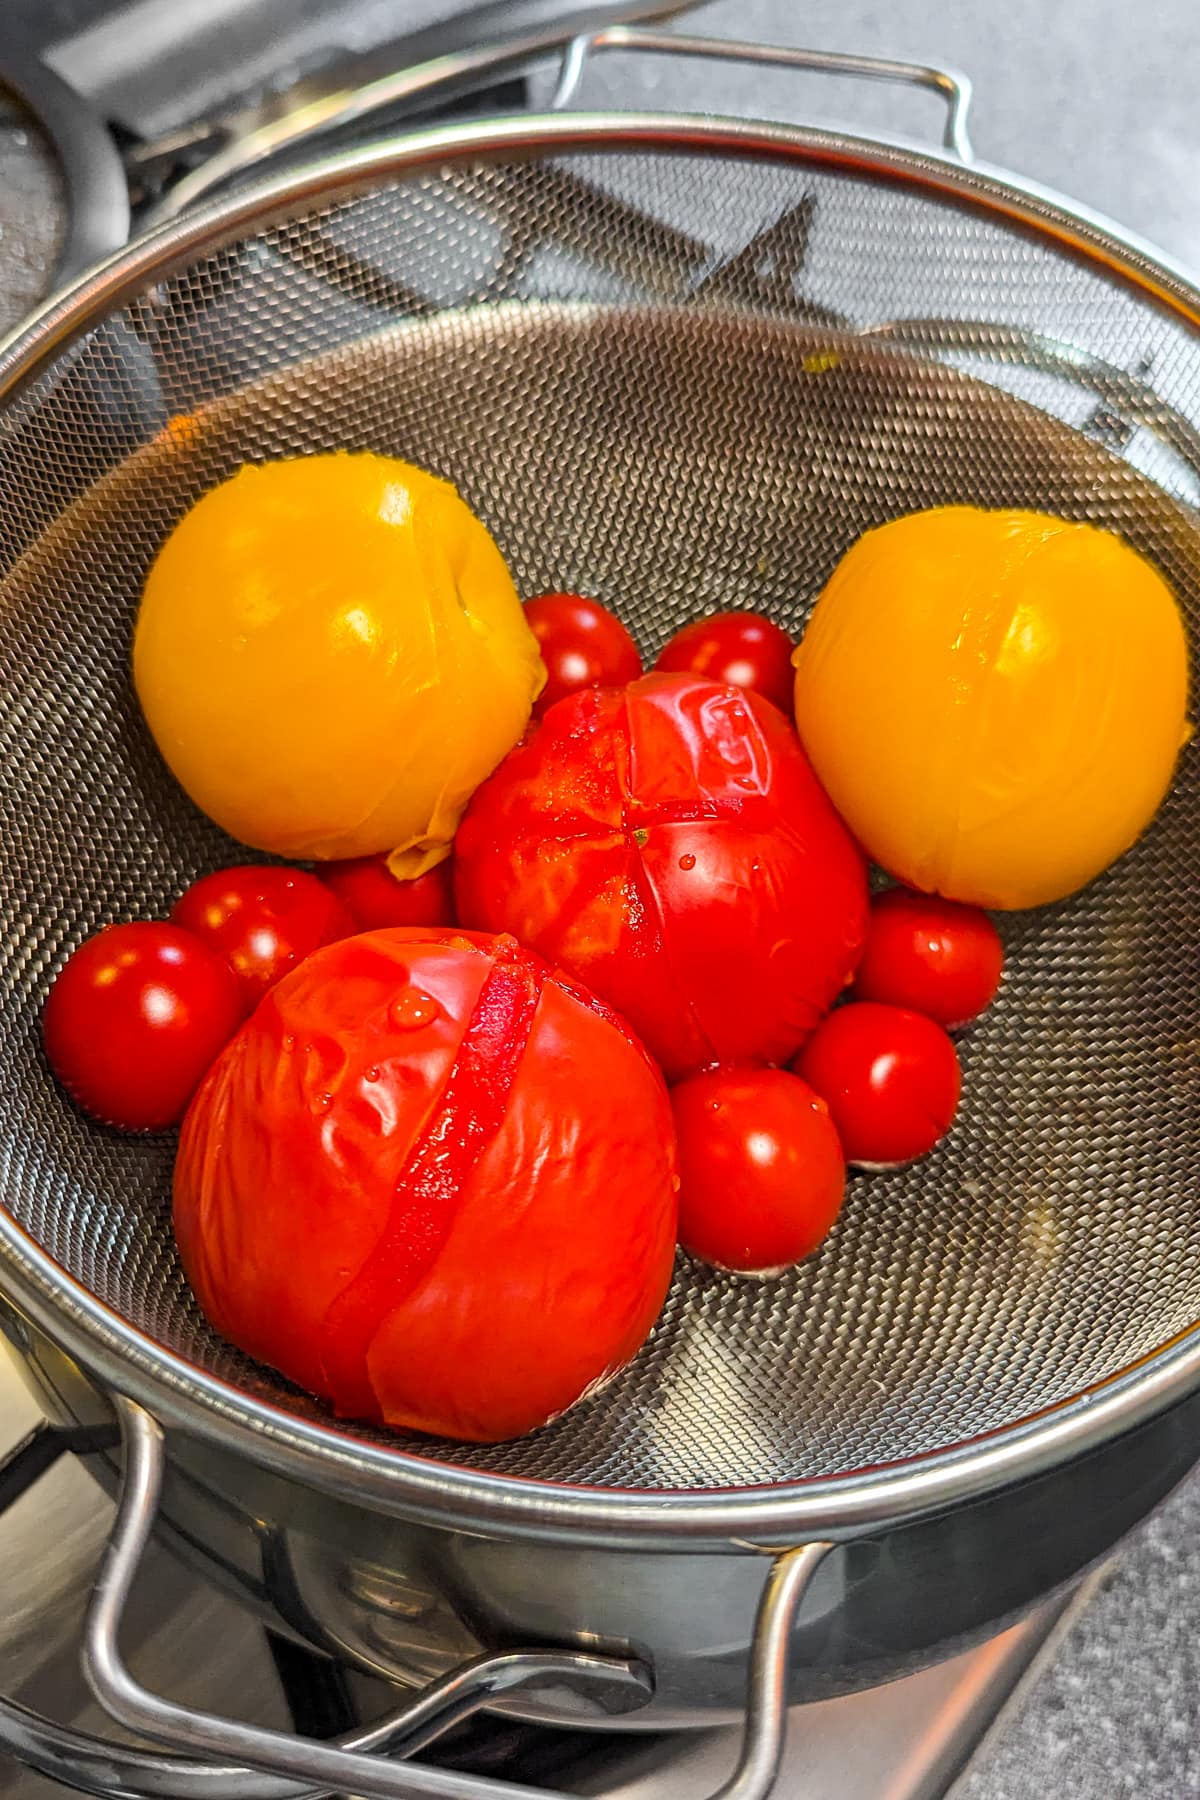 Red and yellow tomatoes that drain on a sieve.